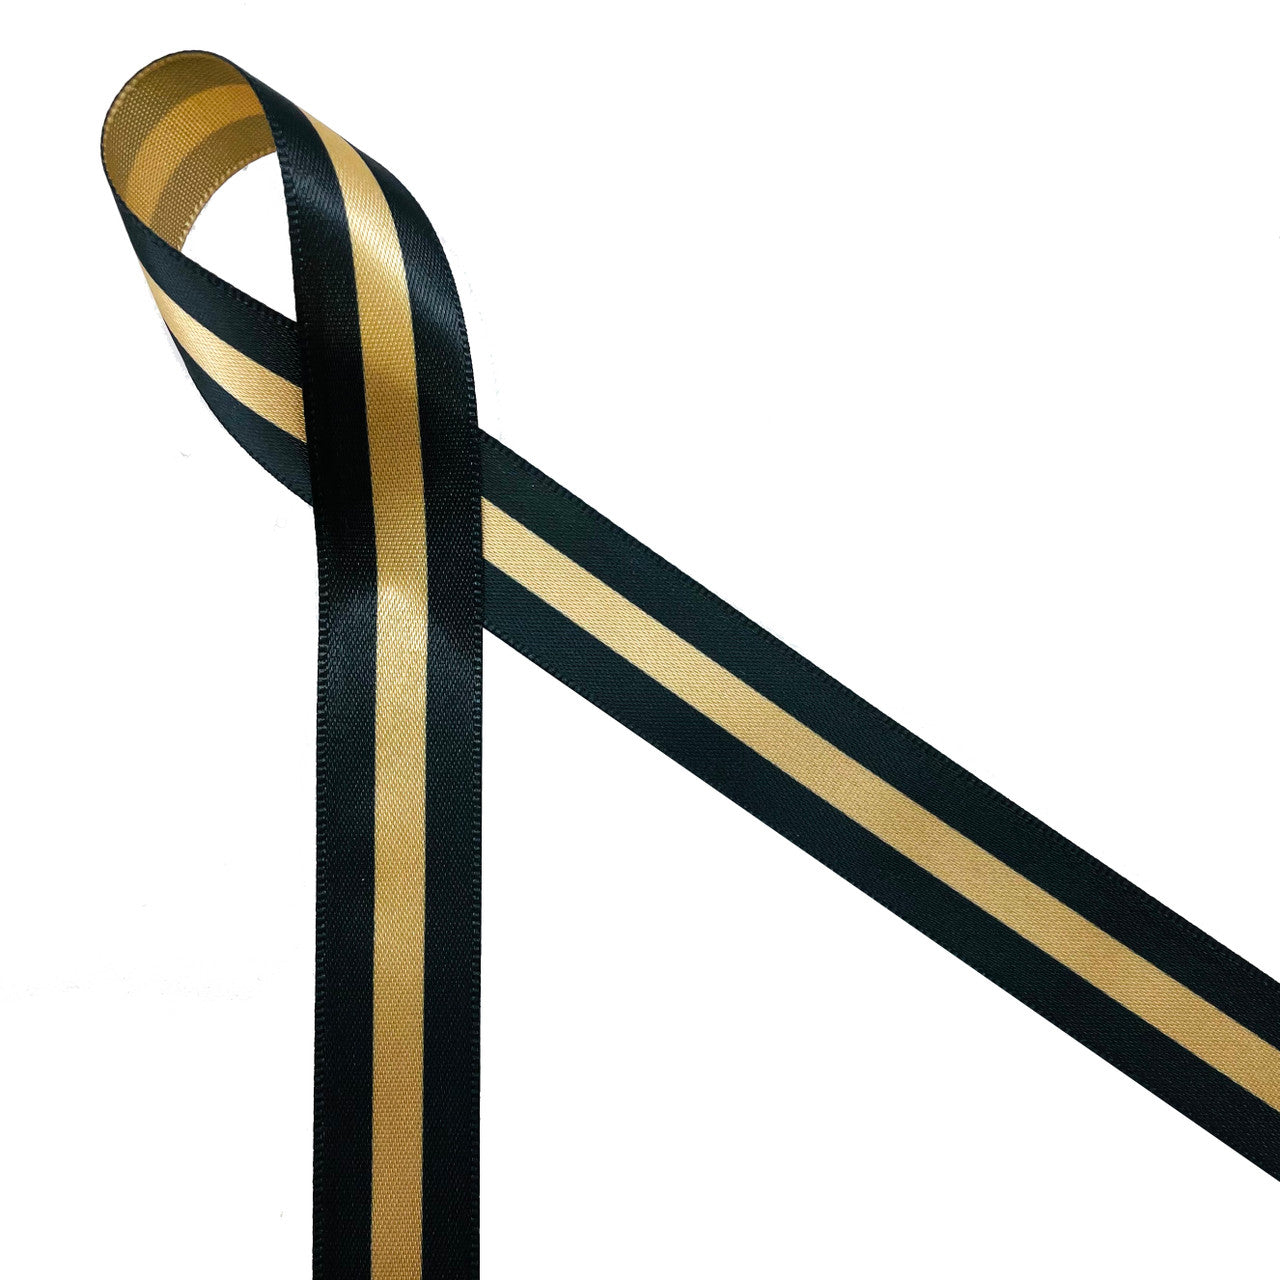 Dispatcher ribbon thin gold line printed in black on 5/8" gold single face satin